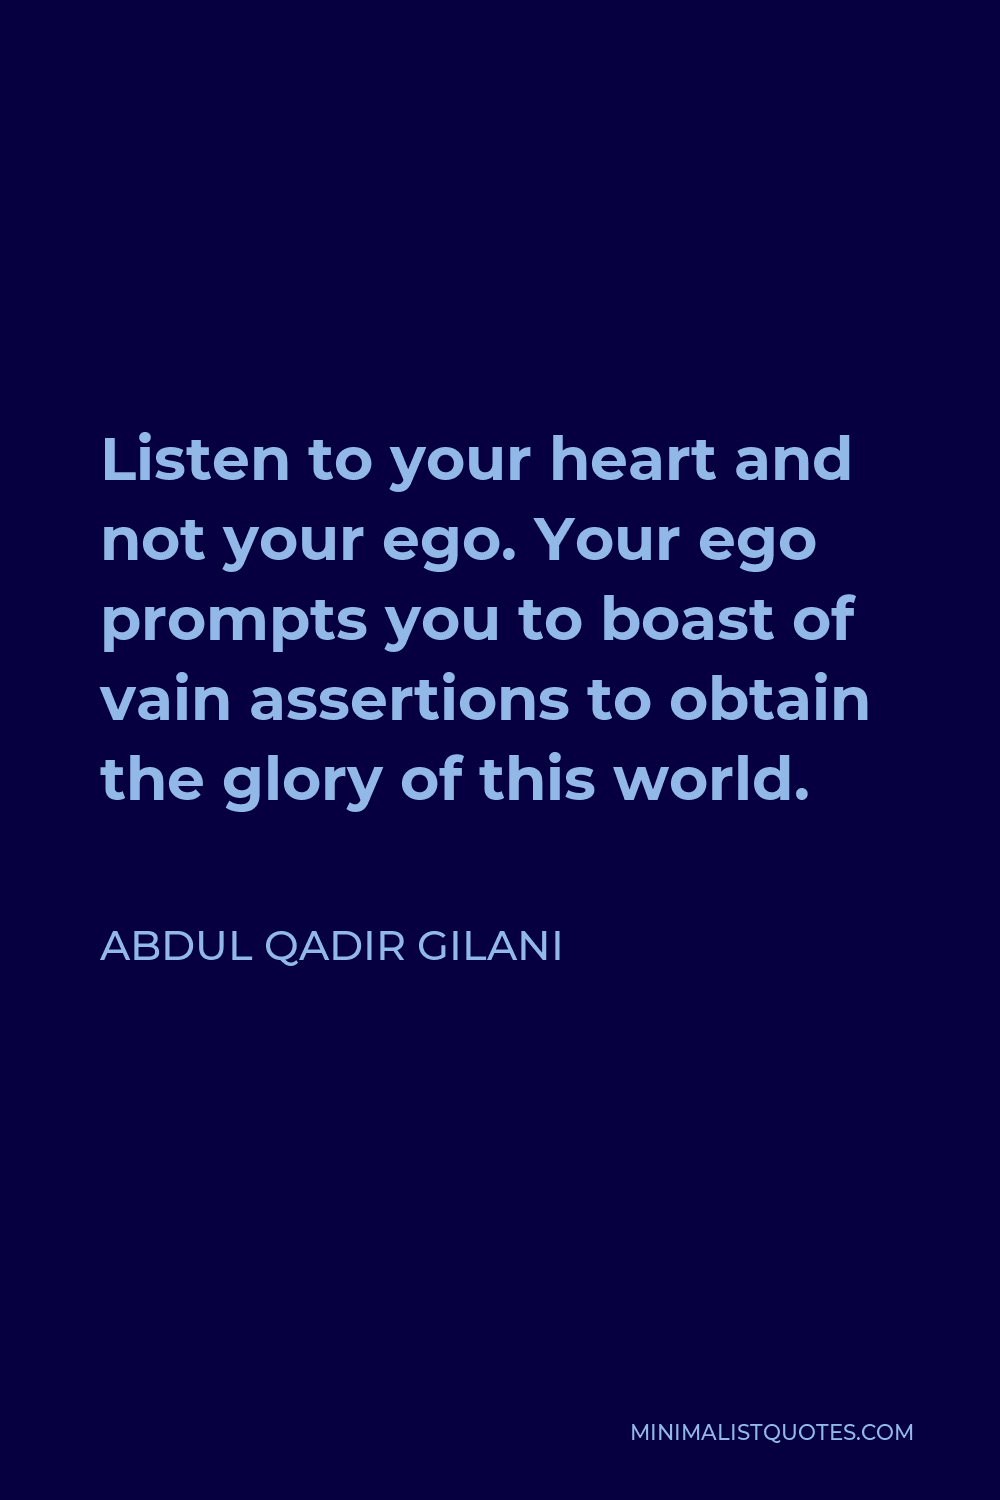 Abdul Qadir Gilani Quote - Listen to your heart and not your ego. Your ego prompts you to boast of vain assertions to obtain the glory of this world.